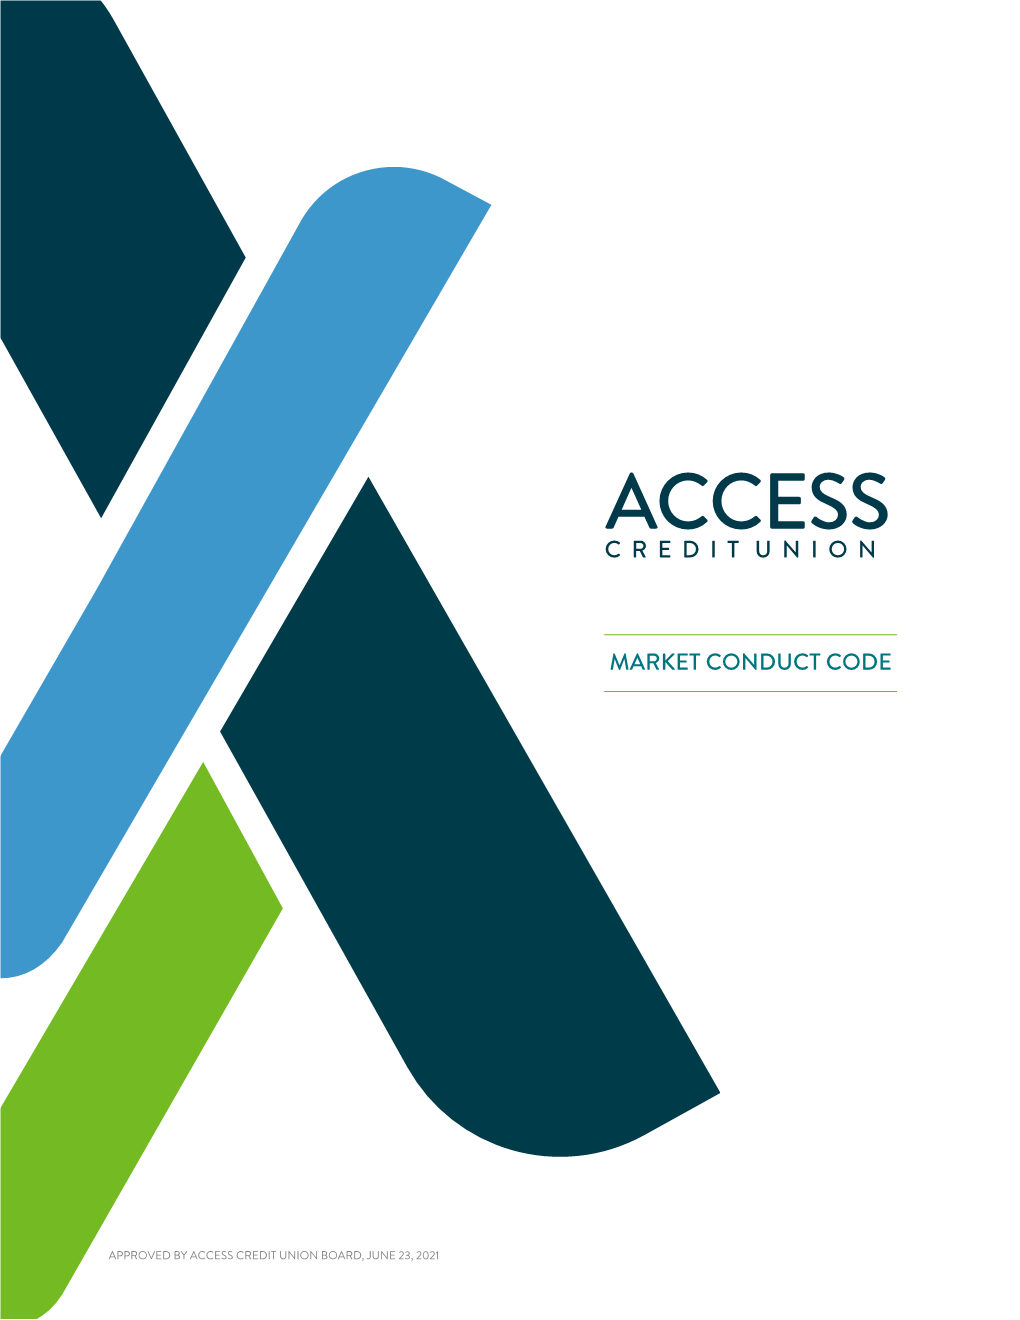 ACCESS CREDIT UNION BOARD, JUNE 23, 2021 INTRODUCTION: Principles in the Code